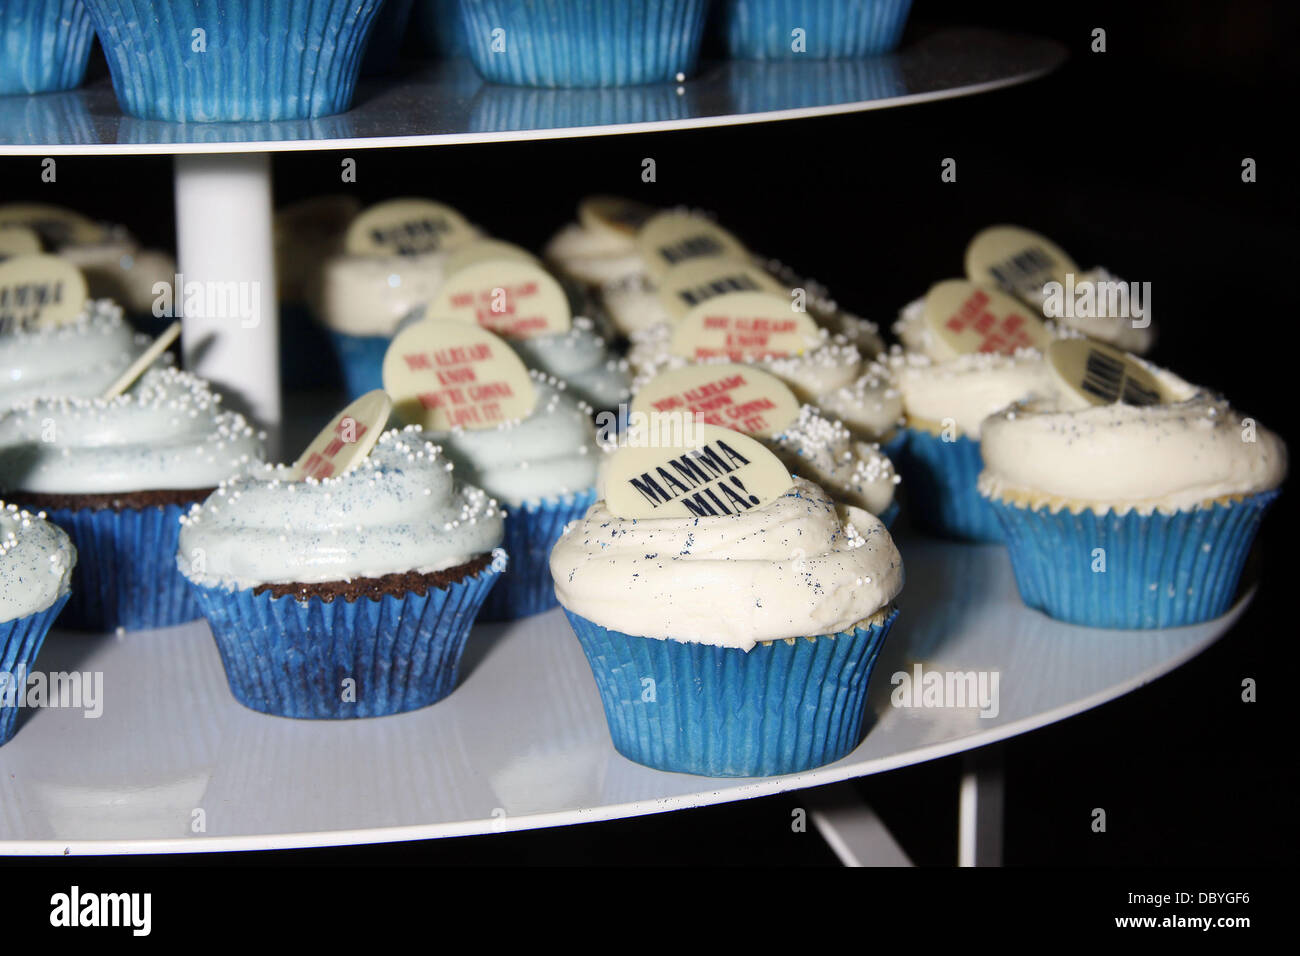 Atmosphere Mamma Mia! celebrates becoming the 10th longest running show in Broadway history by unveiling an official Magnolia Bakery Mamma Mia! wedding cupcake at the Winter Garden Theatre  New York City, USA - 14.09.11 Stock Photo